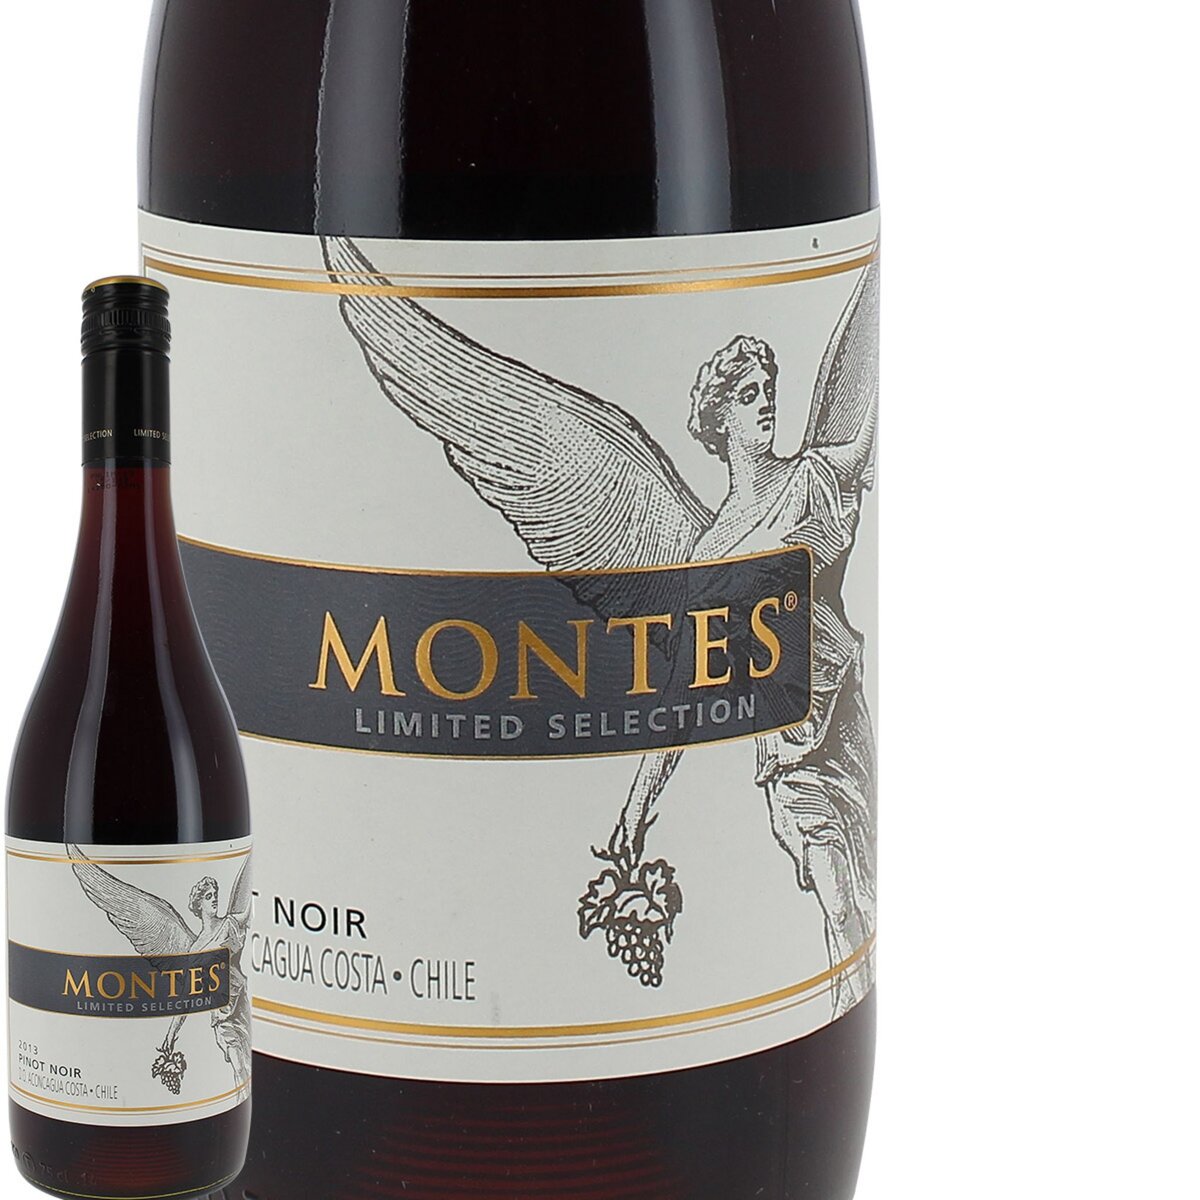 Montes Limited Selection Pinot Noir Chili Rouge 2013